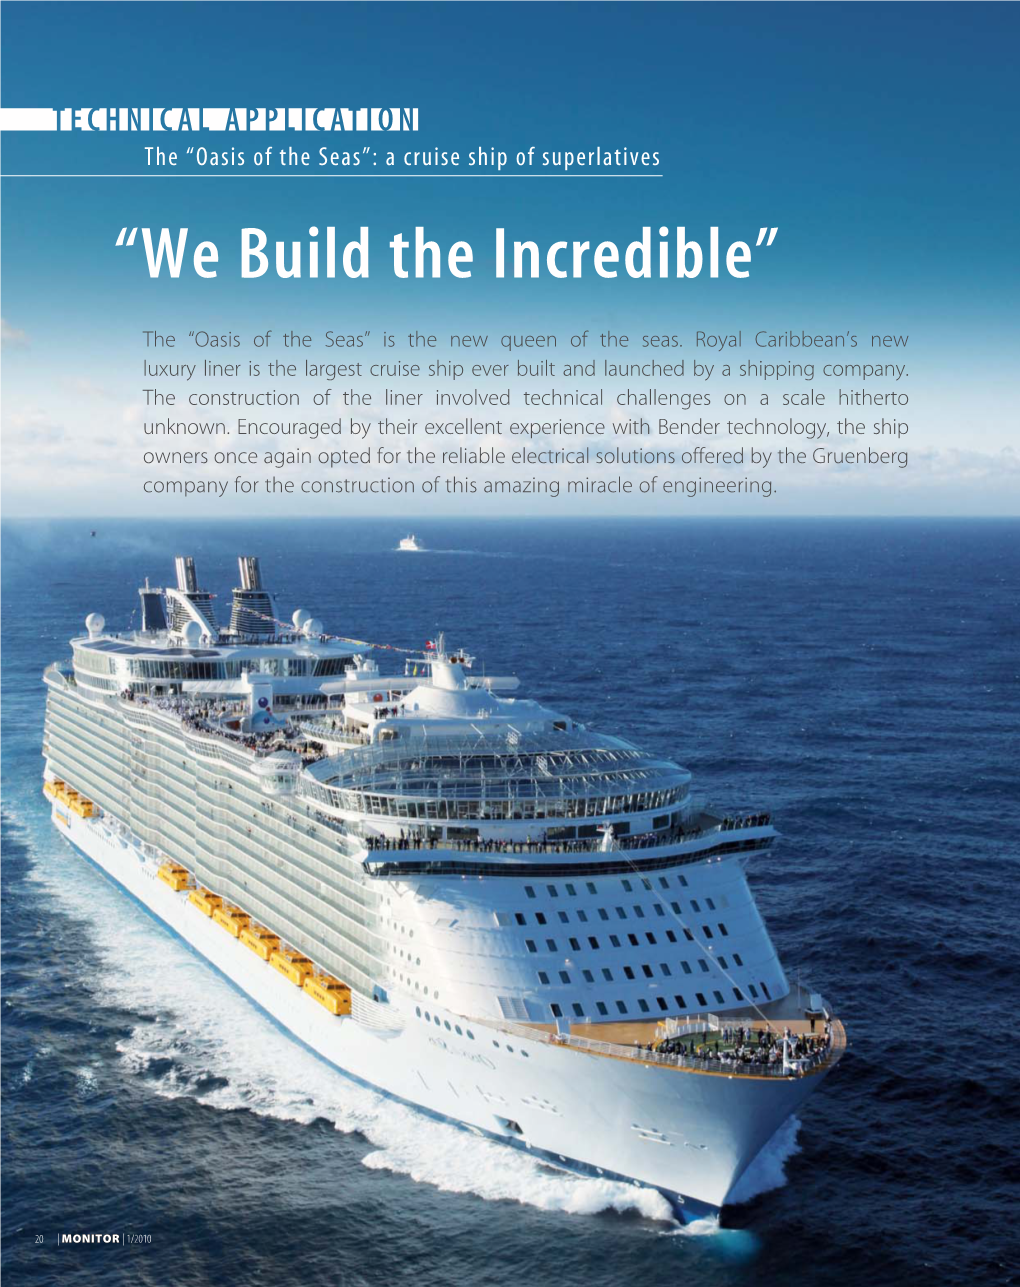 Oasis of the Seas”: a Cruise Ship of Superlatives “We Build the Incredible”